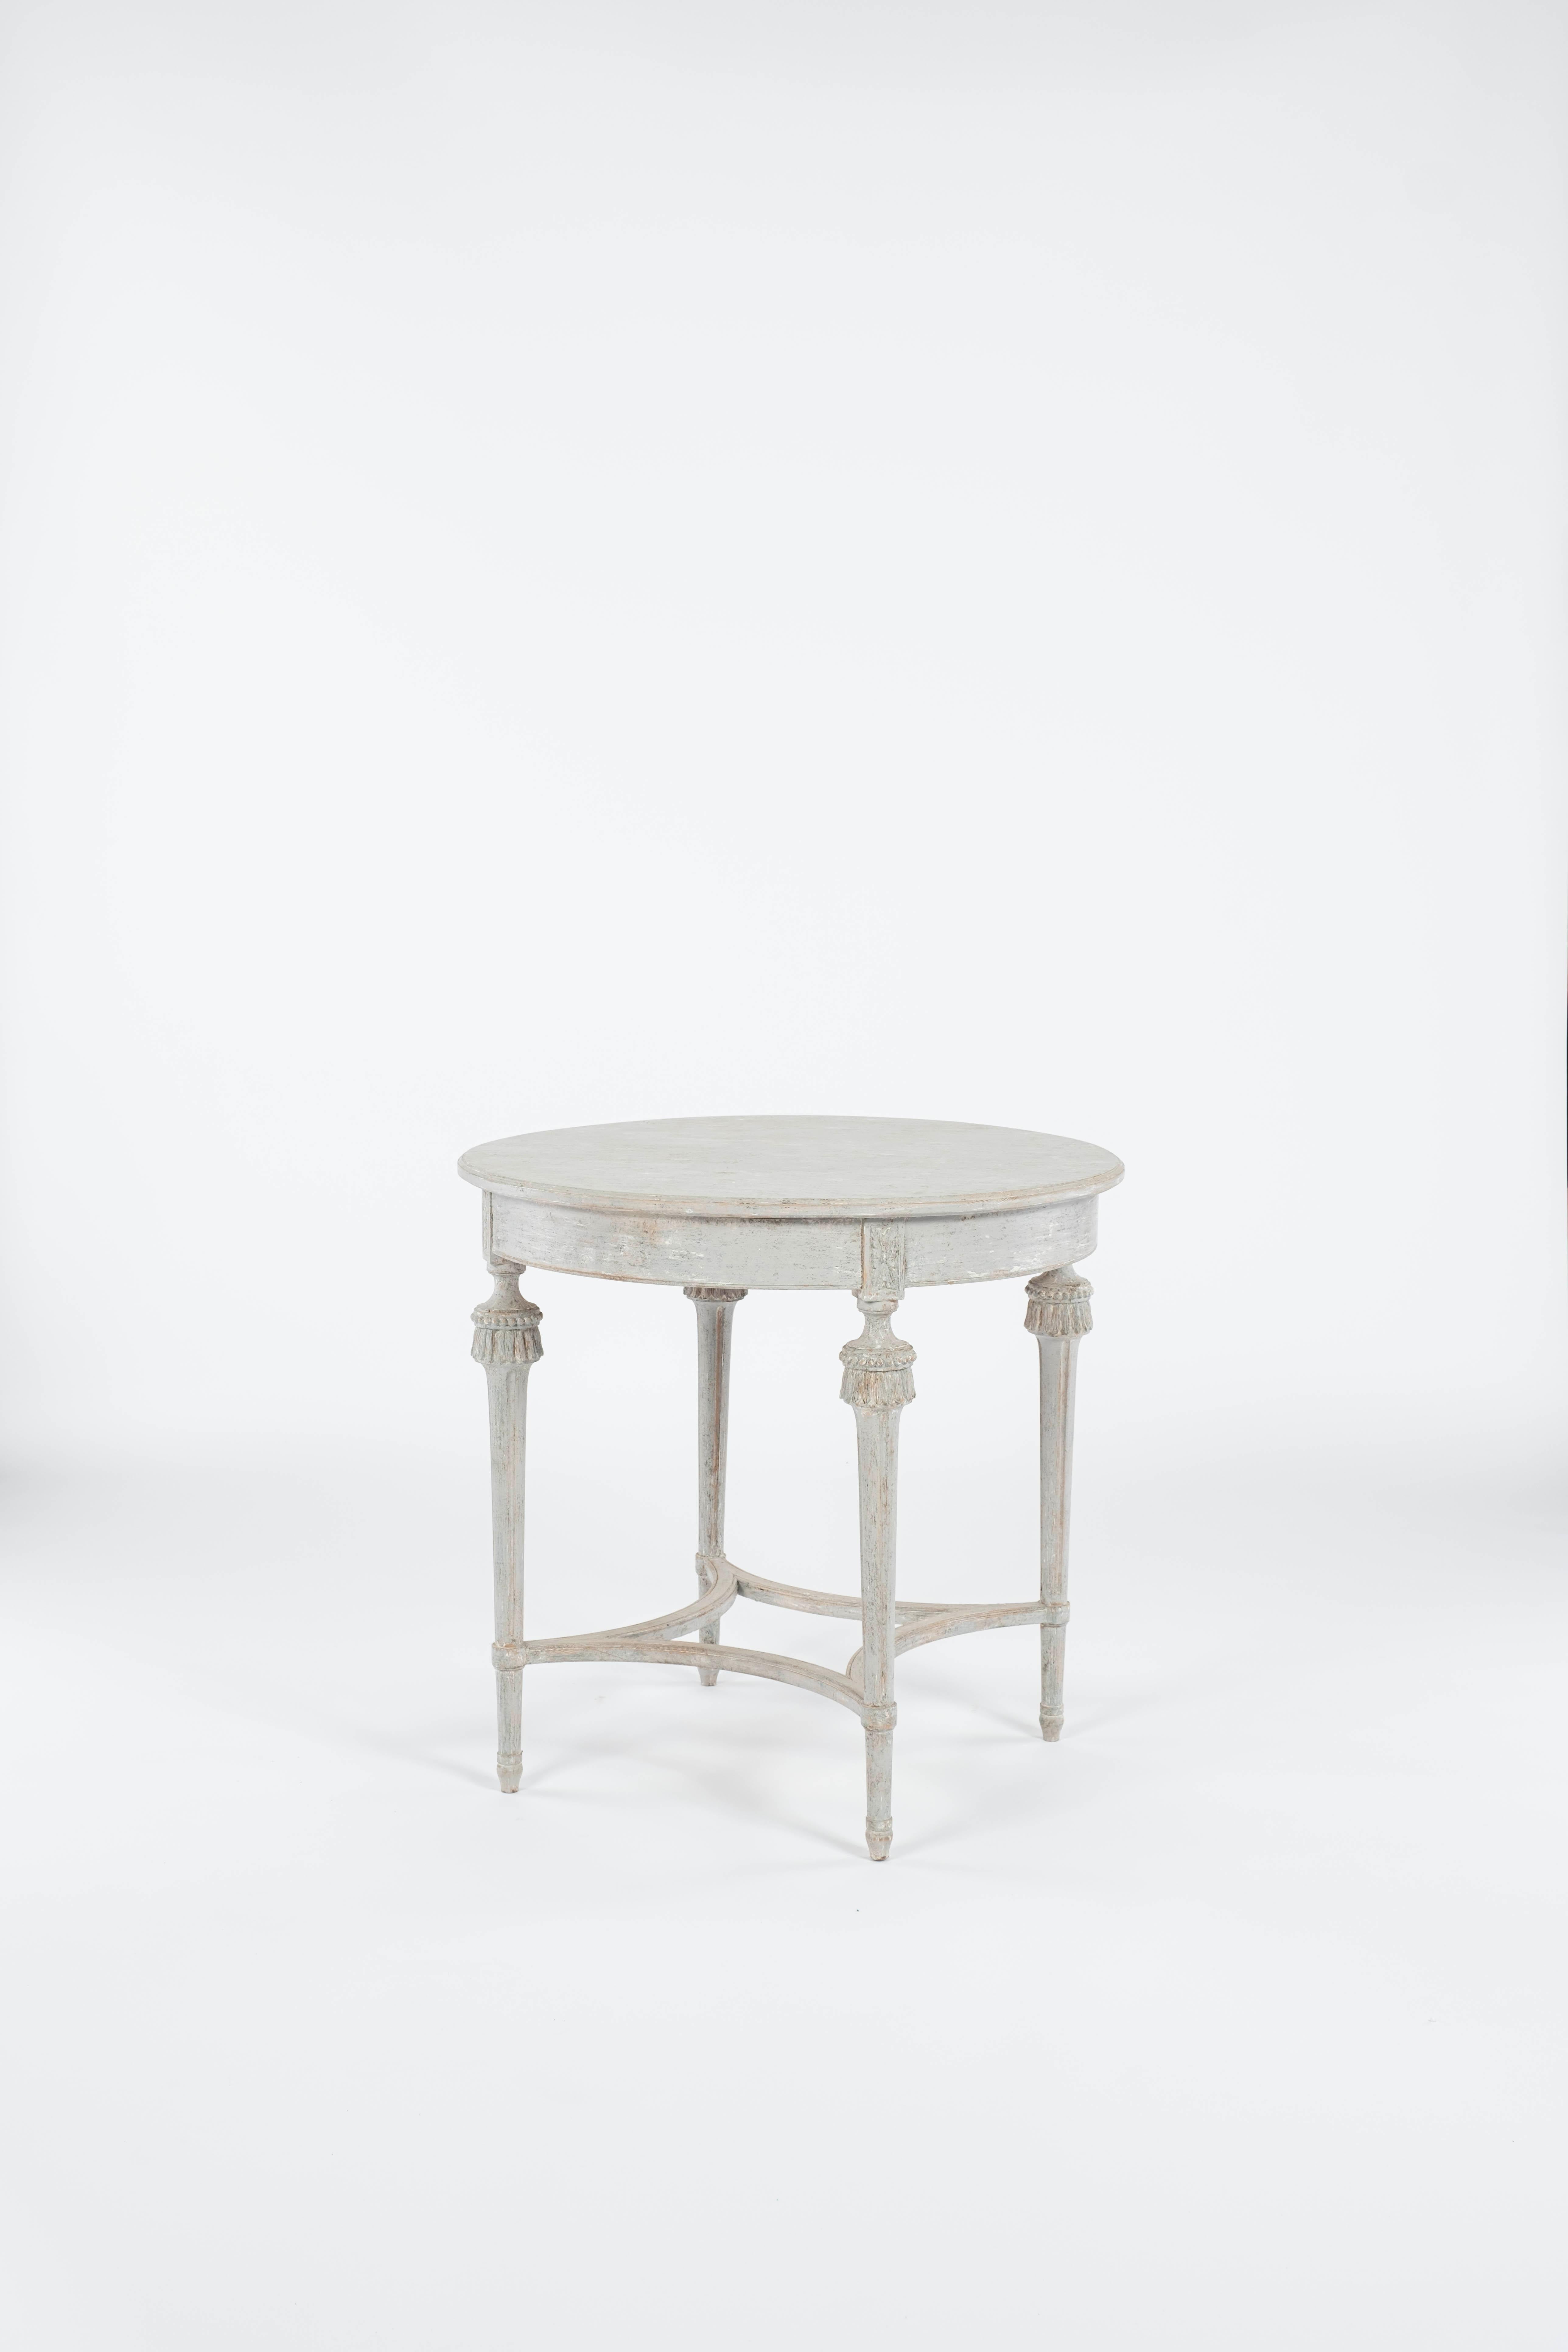 Swedish 19th C. Gustavian Round Table For Sale